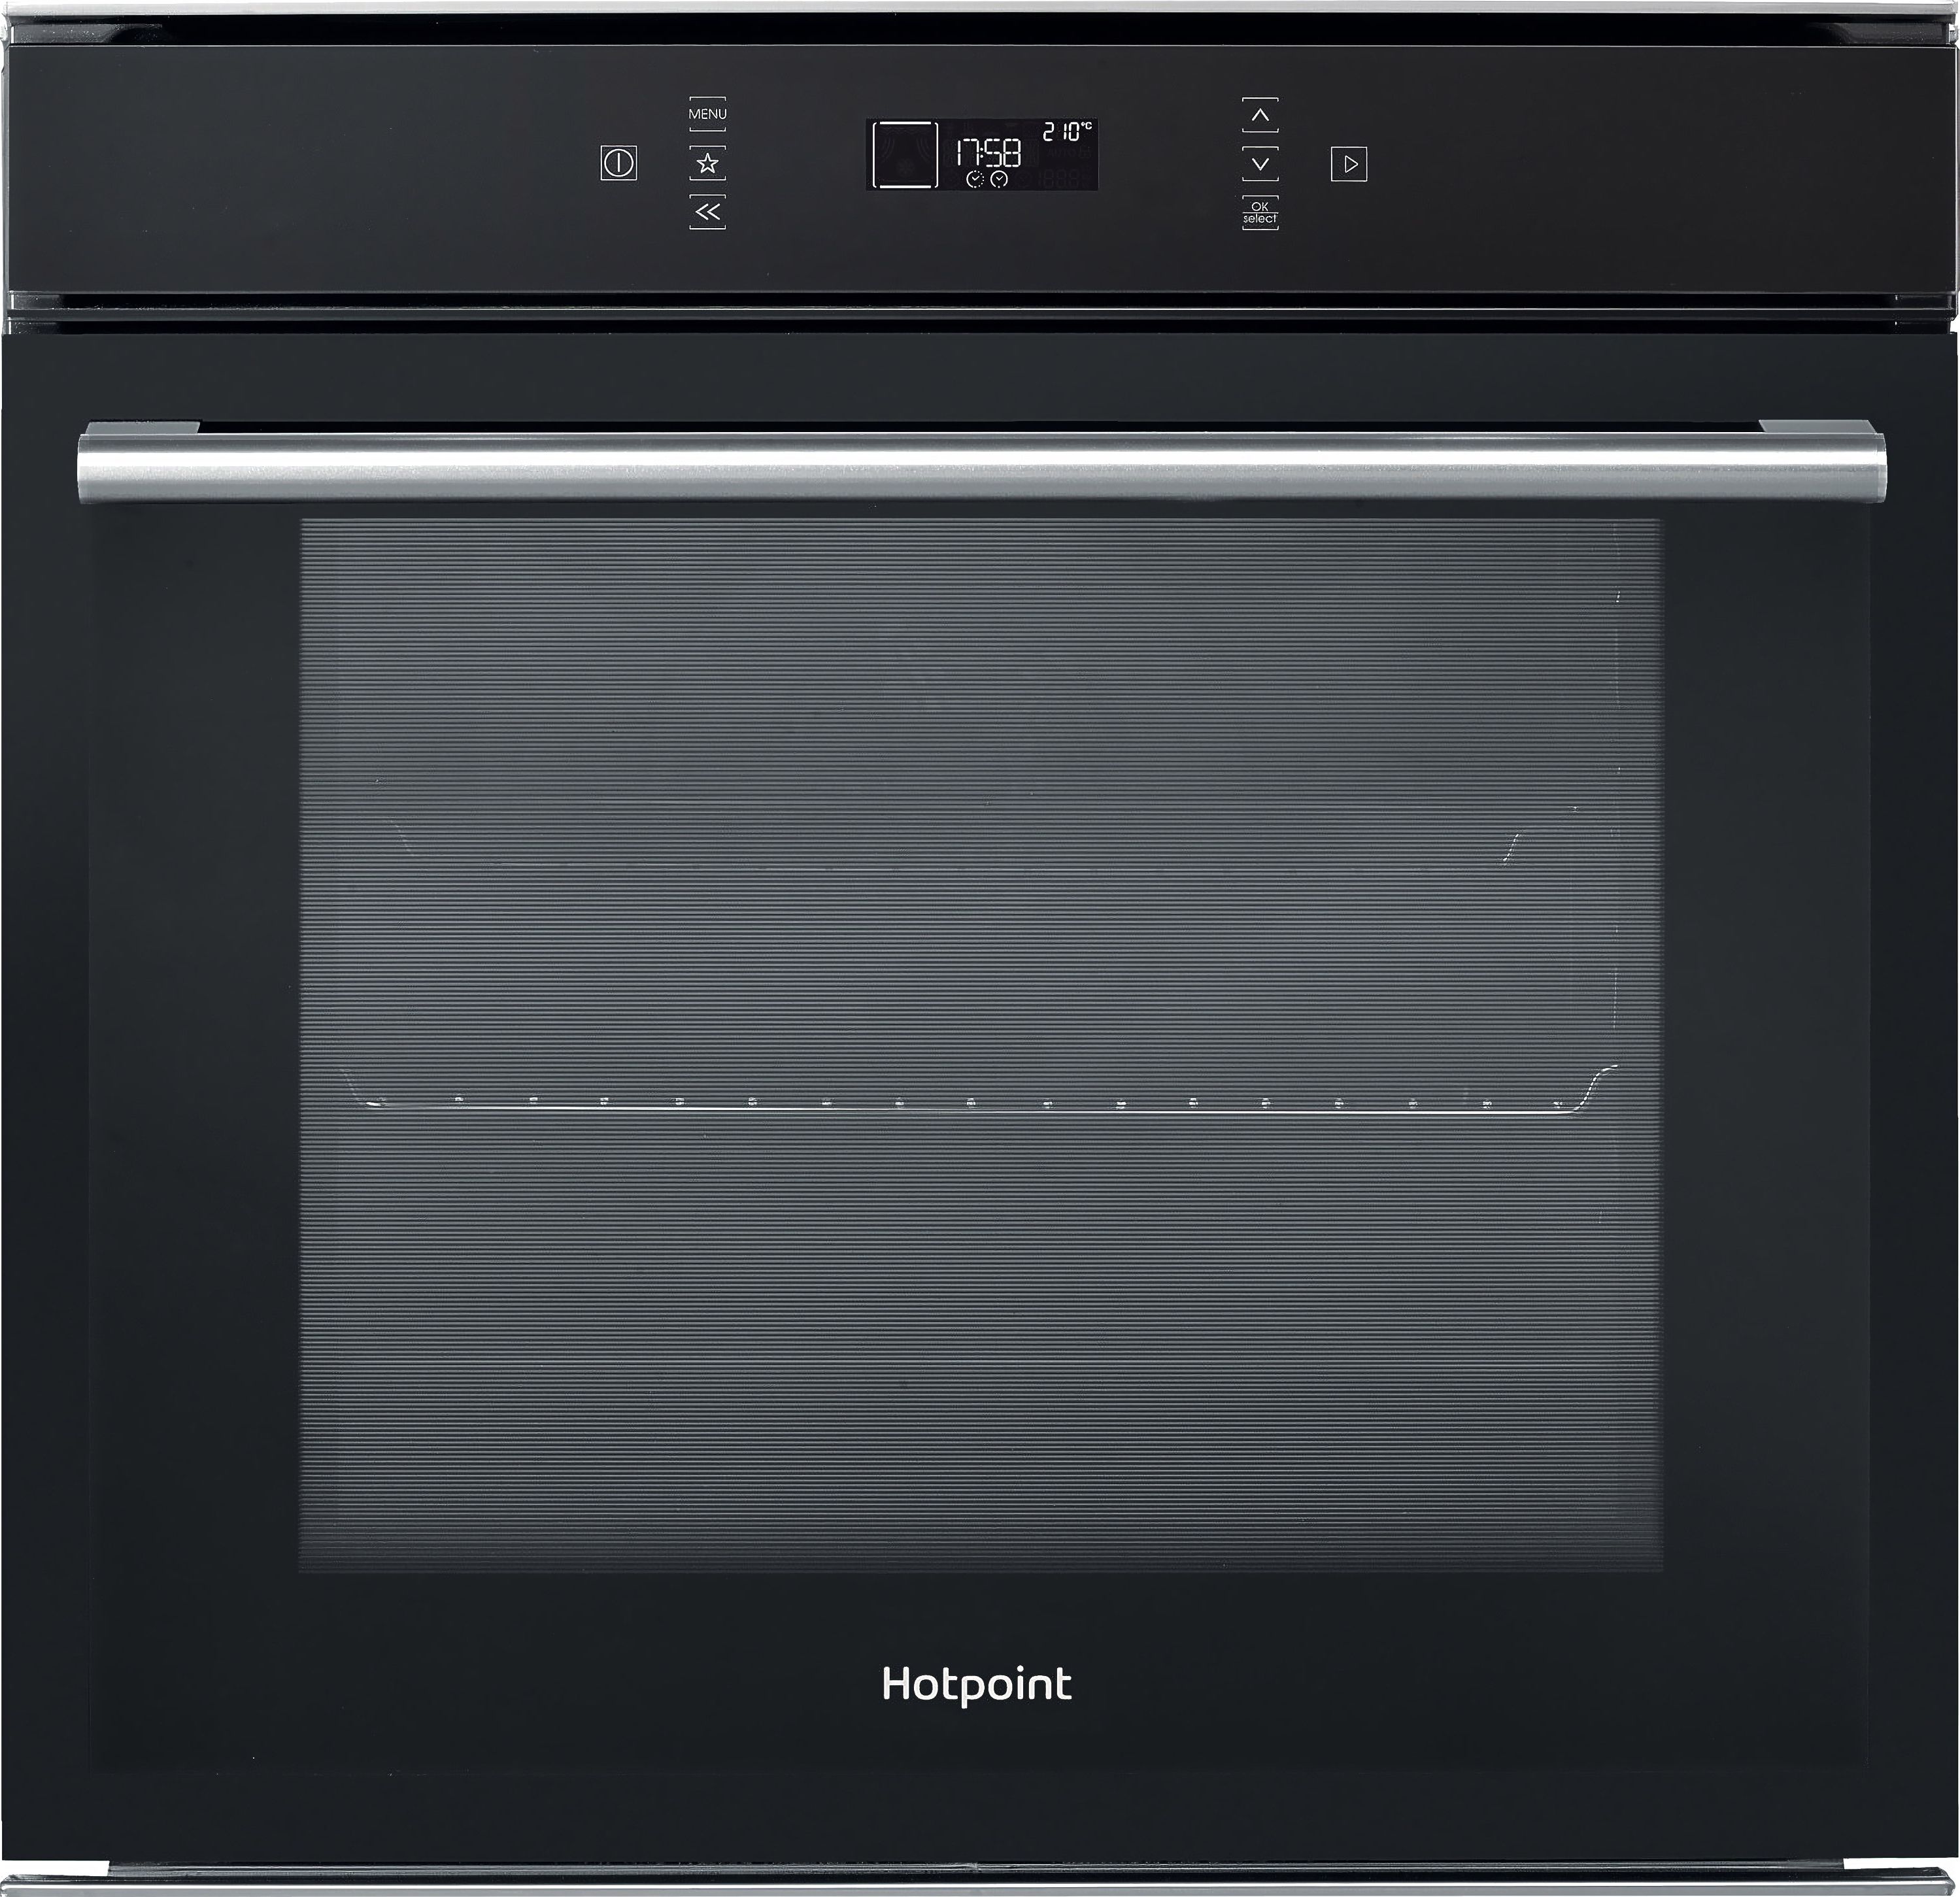 Hotpoint Class 6 SI6871SPBL Built In Electric Single Oven and Pyrolytic Cleaning - Black - A+ Rated, Black